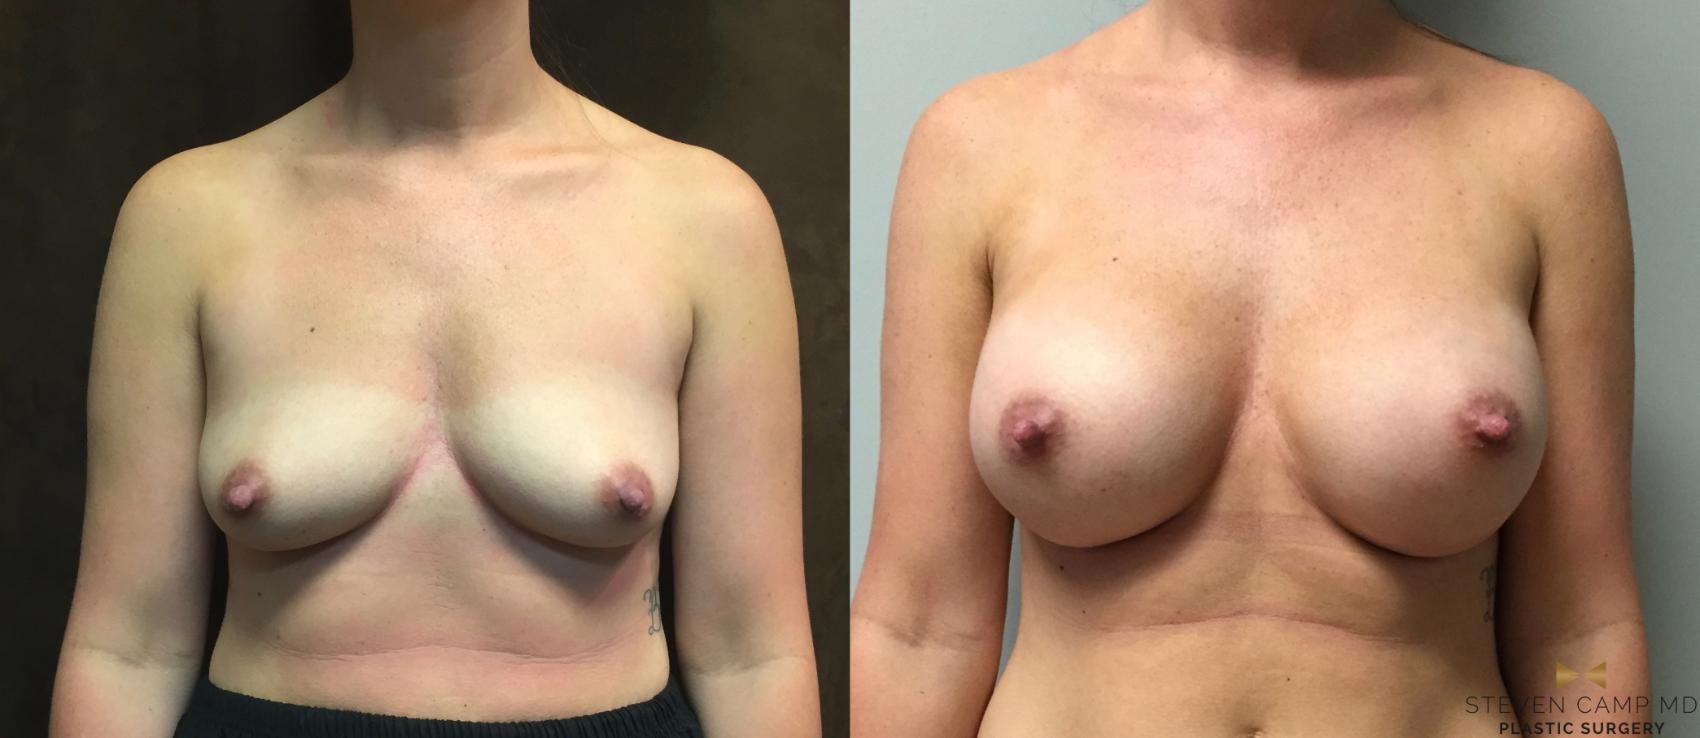 Before & After Case2921 by Steven Camp MD Plastic Surgery & Aesthetics, in Fort Worth